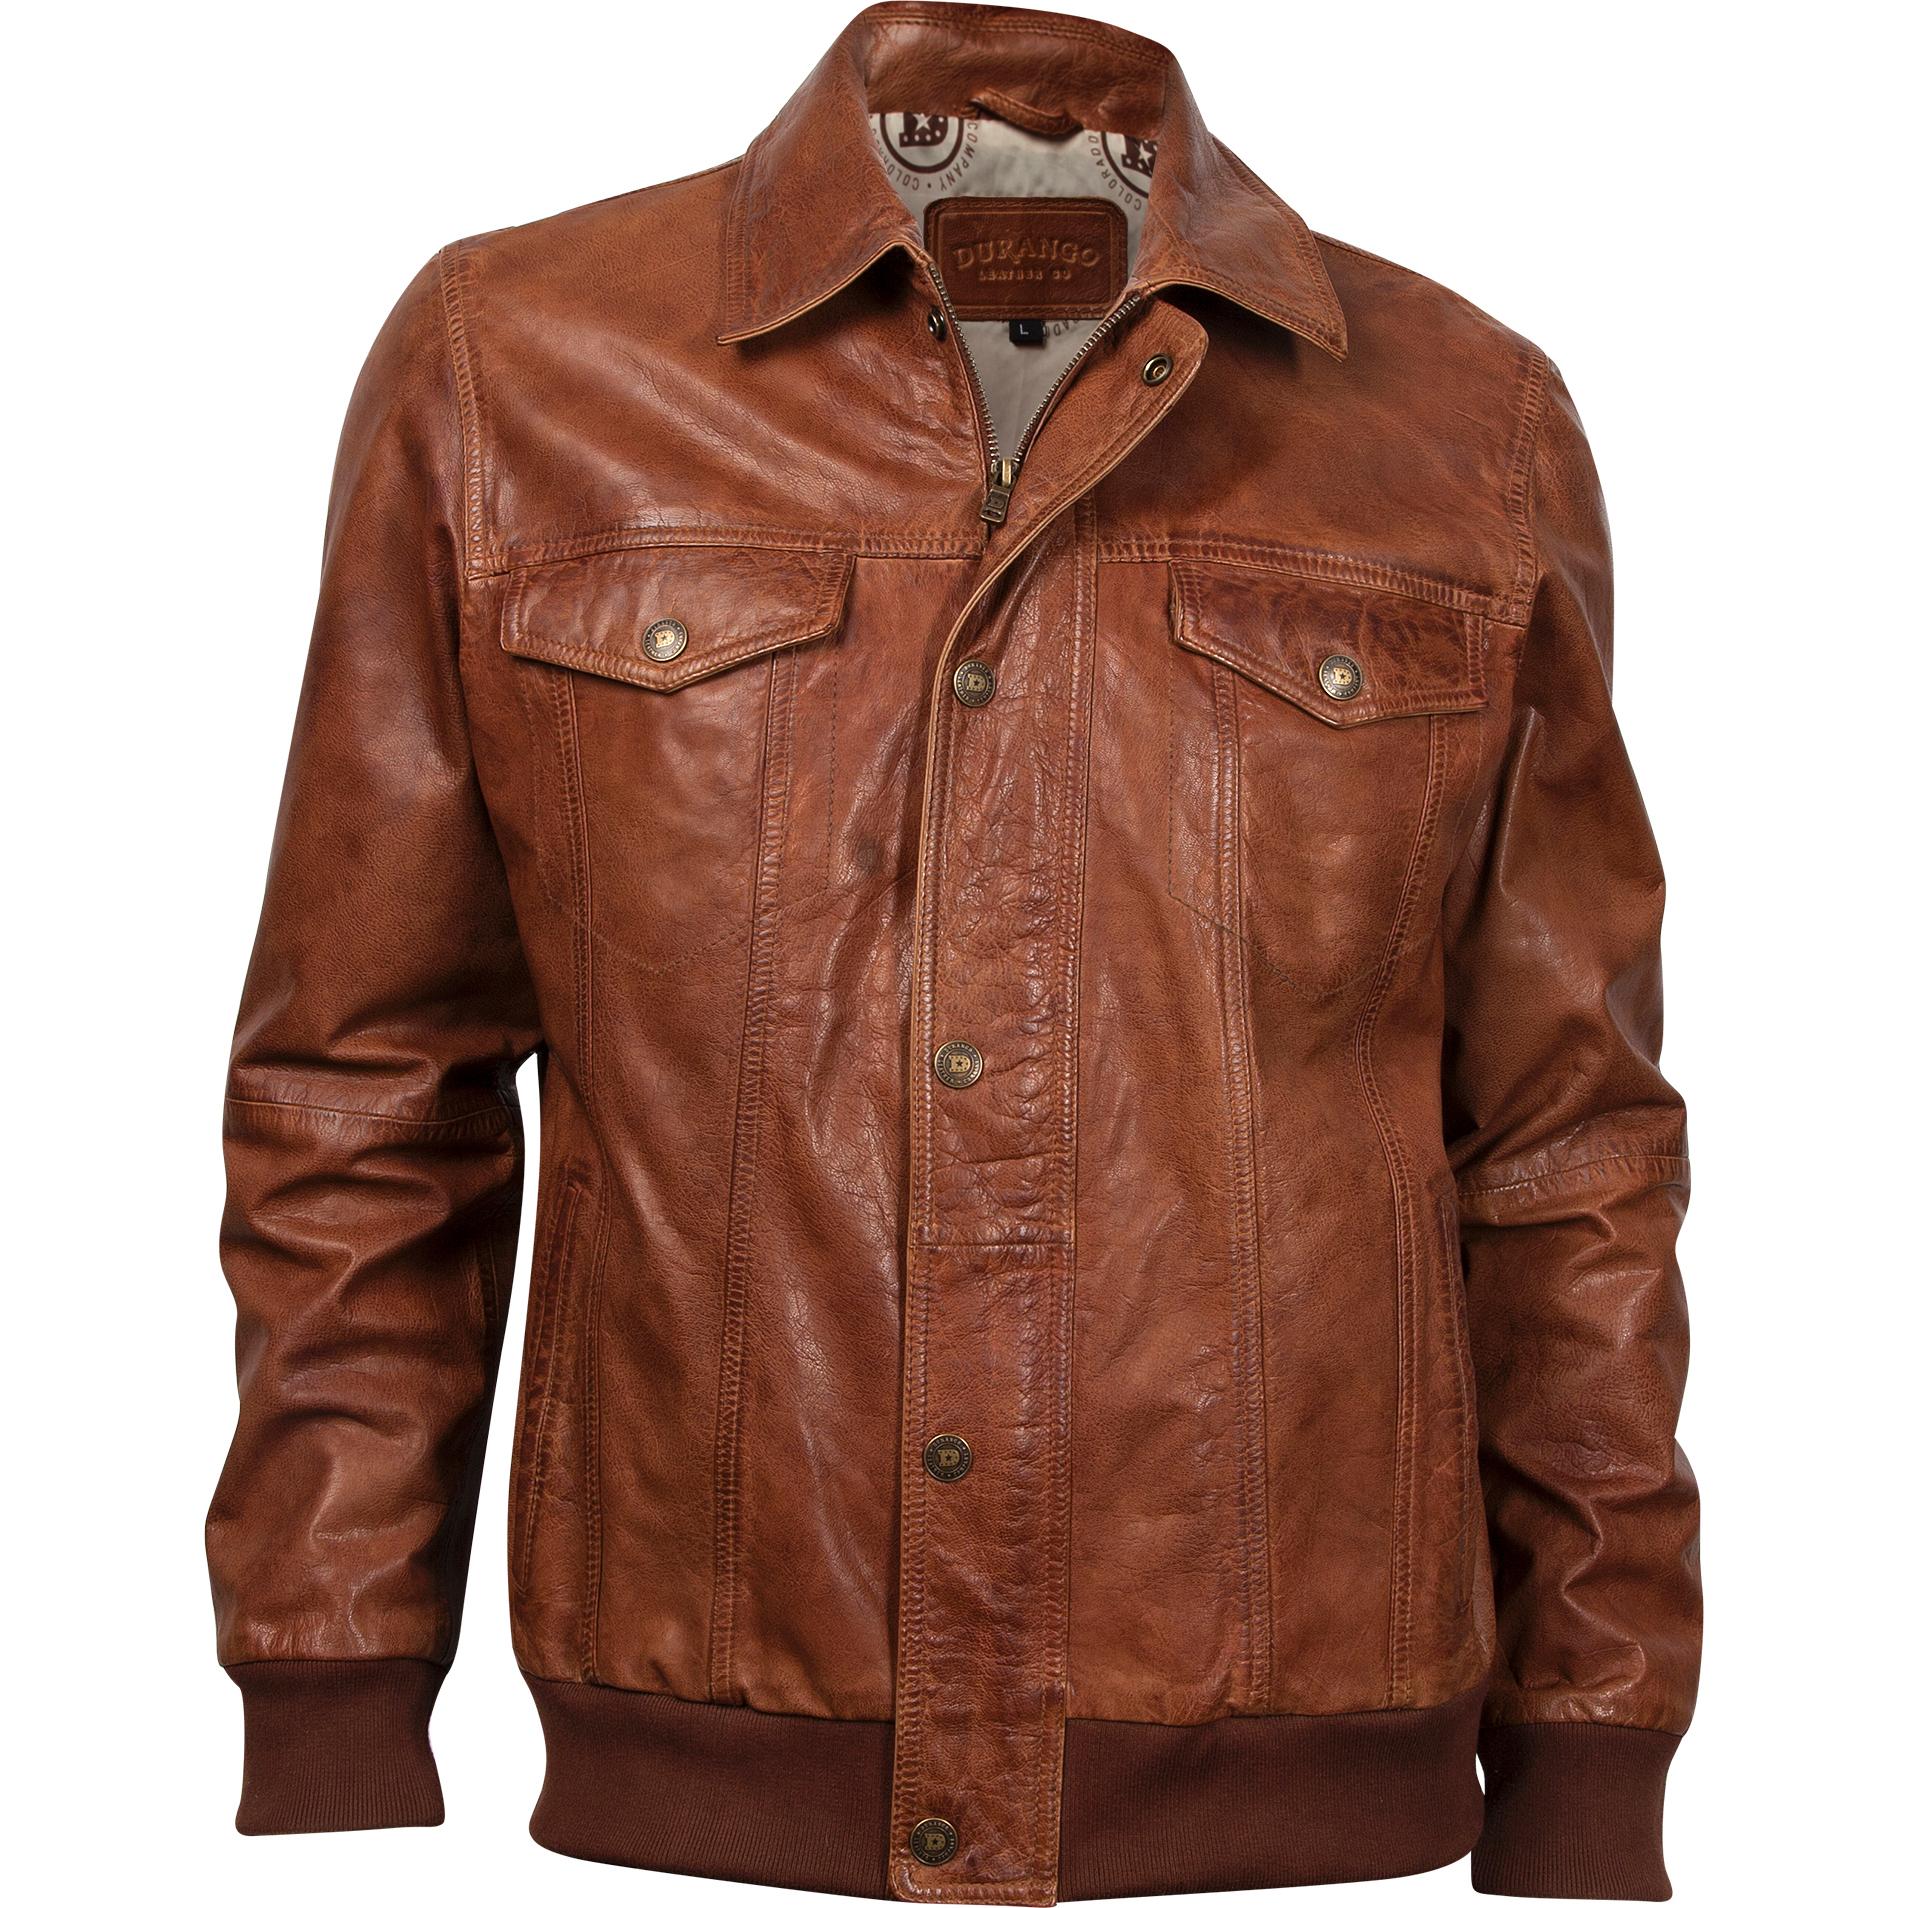 Men's Brown Cow Puncher Jacket, Durango Leather Company